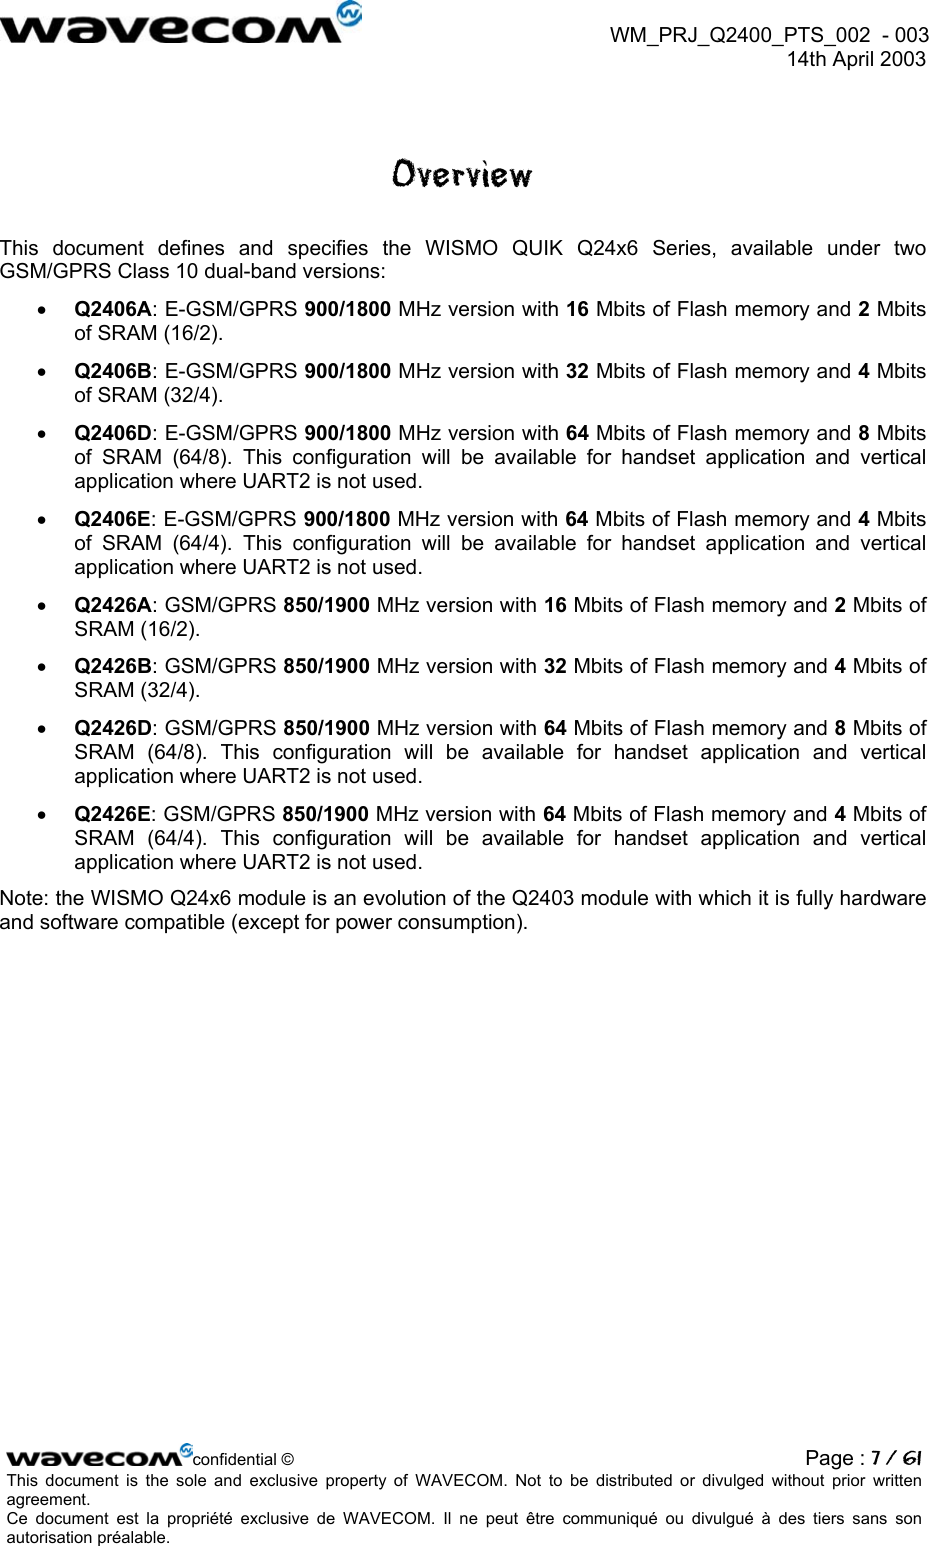  WM_PRJ_Q2400_PTS_002  - 003  14th April 2003   Overview This document defines and specifies the WISMO QUIK Q24x6 Series, available under two GSM/GPRS Class 10 dual-band versions: •  Q2406A: E-GSM/GPRS 900/1800 MHz version with 16 Mbits of Flash memory and 2 Mbits of SRAM (16/2). •  Q2406B: E-GSM/GPRS 900/1800 MHz version with 32 Mbits of Flash memory and 4 Mbits of SRAM (32/4). •  Q2406D: E-GSM/GPRS 900/1800 MHz version with 64 Mbits of Flash memory and 8 Mbits of SRAM (64/8). This configuration will be available for handset application and vertical application where UART2 is not used. •  Q2406E: E-GSM/GPRS 900/1800 MHz version with 64 Mbits of Flash memory and 4 Mbits of SRAM (64/4). This configuration will be available for handset application and vertical application where UART2 is not used. •  Q2426A: GSM/GPRS 850/1900 MHz version with 16 Mbits of Flash memory and 2 Mbits of SRAM (16/2). •  Q2426B: GSM/GPRS 850/1900 MHz version with 32 Mbits of Flash memory and 4 Mbits of SRAM (32/4). •  Q2426D: GSM/GPRS 850/1900 MHz version with 64 Mbits of Flash memory and 8 Mbits of SRAM (64/8). This configuration will be available for handset application and vertical application where UART2 is not used. •  Q2426E: GSM/GPRS 850/1900 MHz version with 64 Mbits of Flash memory and 4 Mbits of SRAM (64/4). This configuration will be available for handset application and vertical application where UART2 is not used. Note: the WISMO Q24x6 module is an evolution of the Q2403 module with which it is fully hardware and software compatible (except for power consumption).     confidential © Page : 7 / 61This document is the sole and exclusive property of WAVECOM. Not to be distributed or divulged without prior written agreement.  Ce document est la propriété exclusive de WAVECOM. Il ne peut être communiqué ou divulgué à des tiers sans son autorisation préalable.  